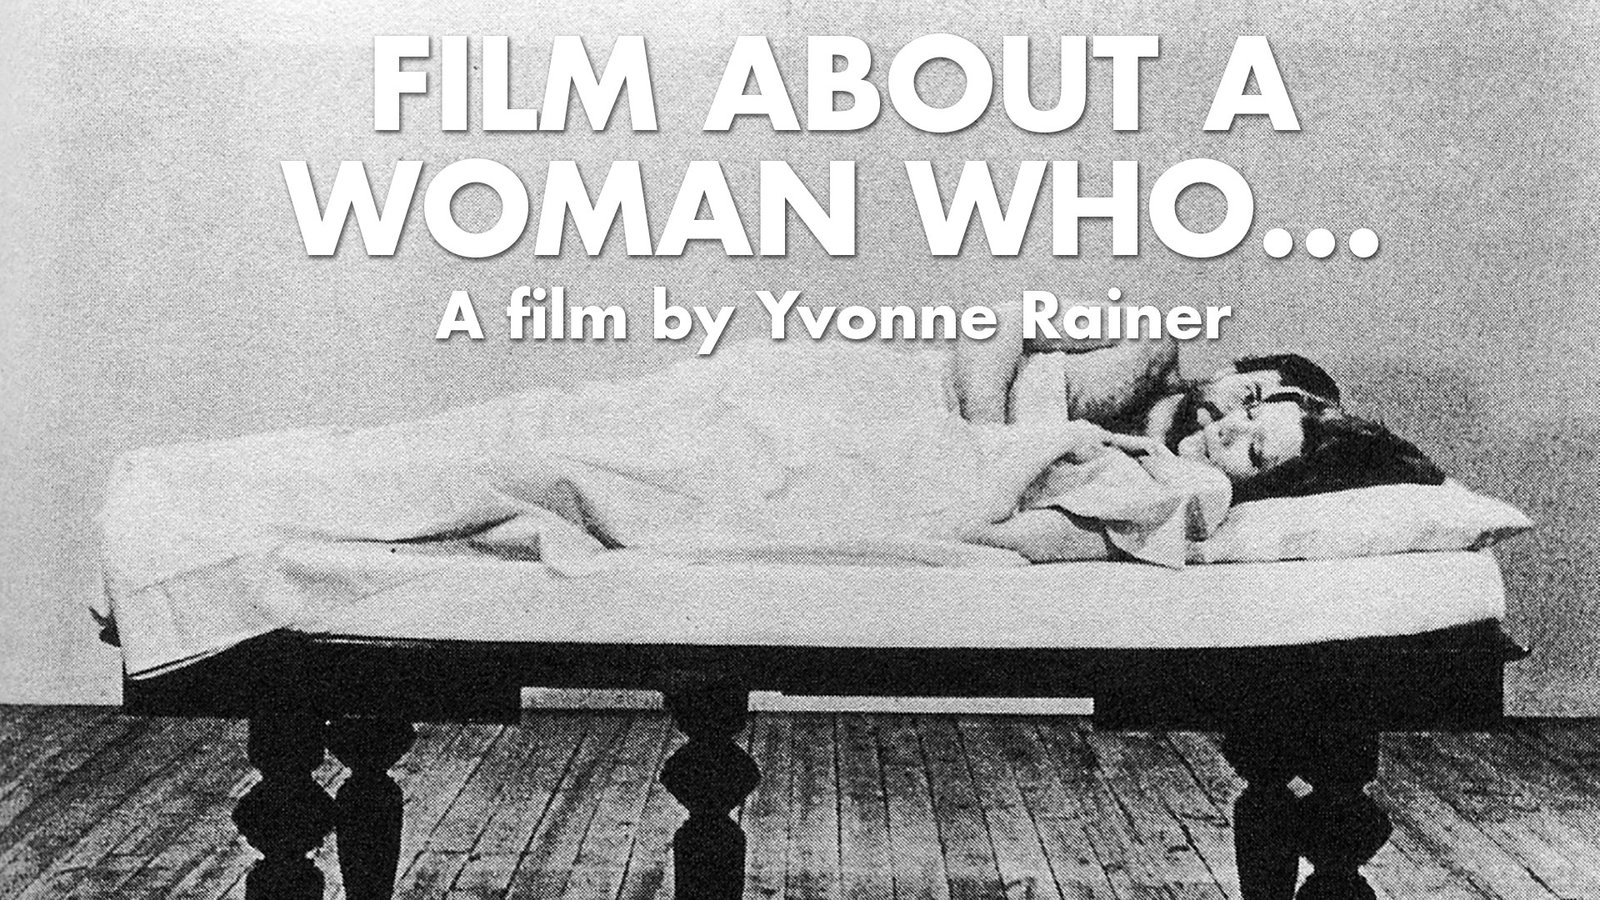 Film About A Woman Who...